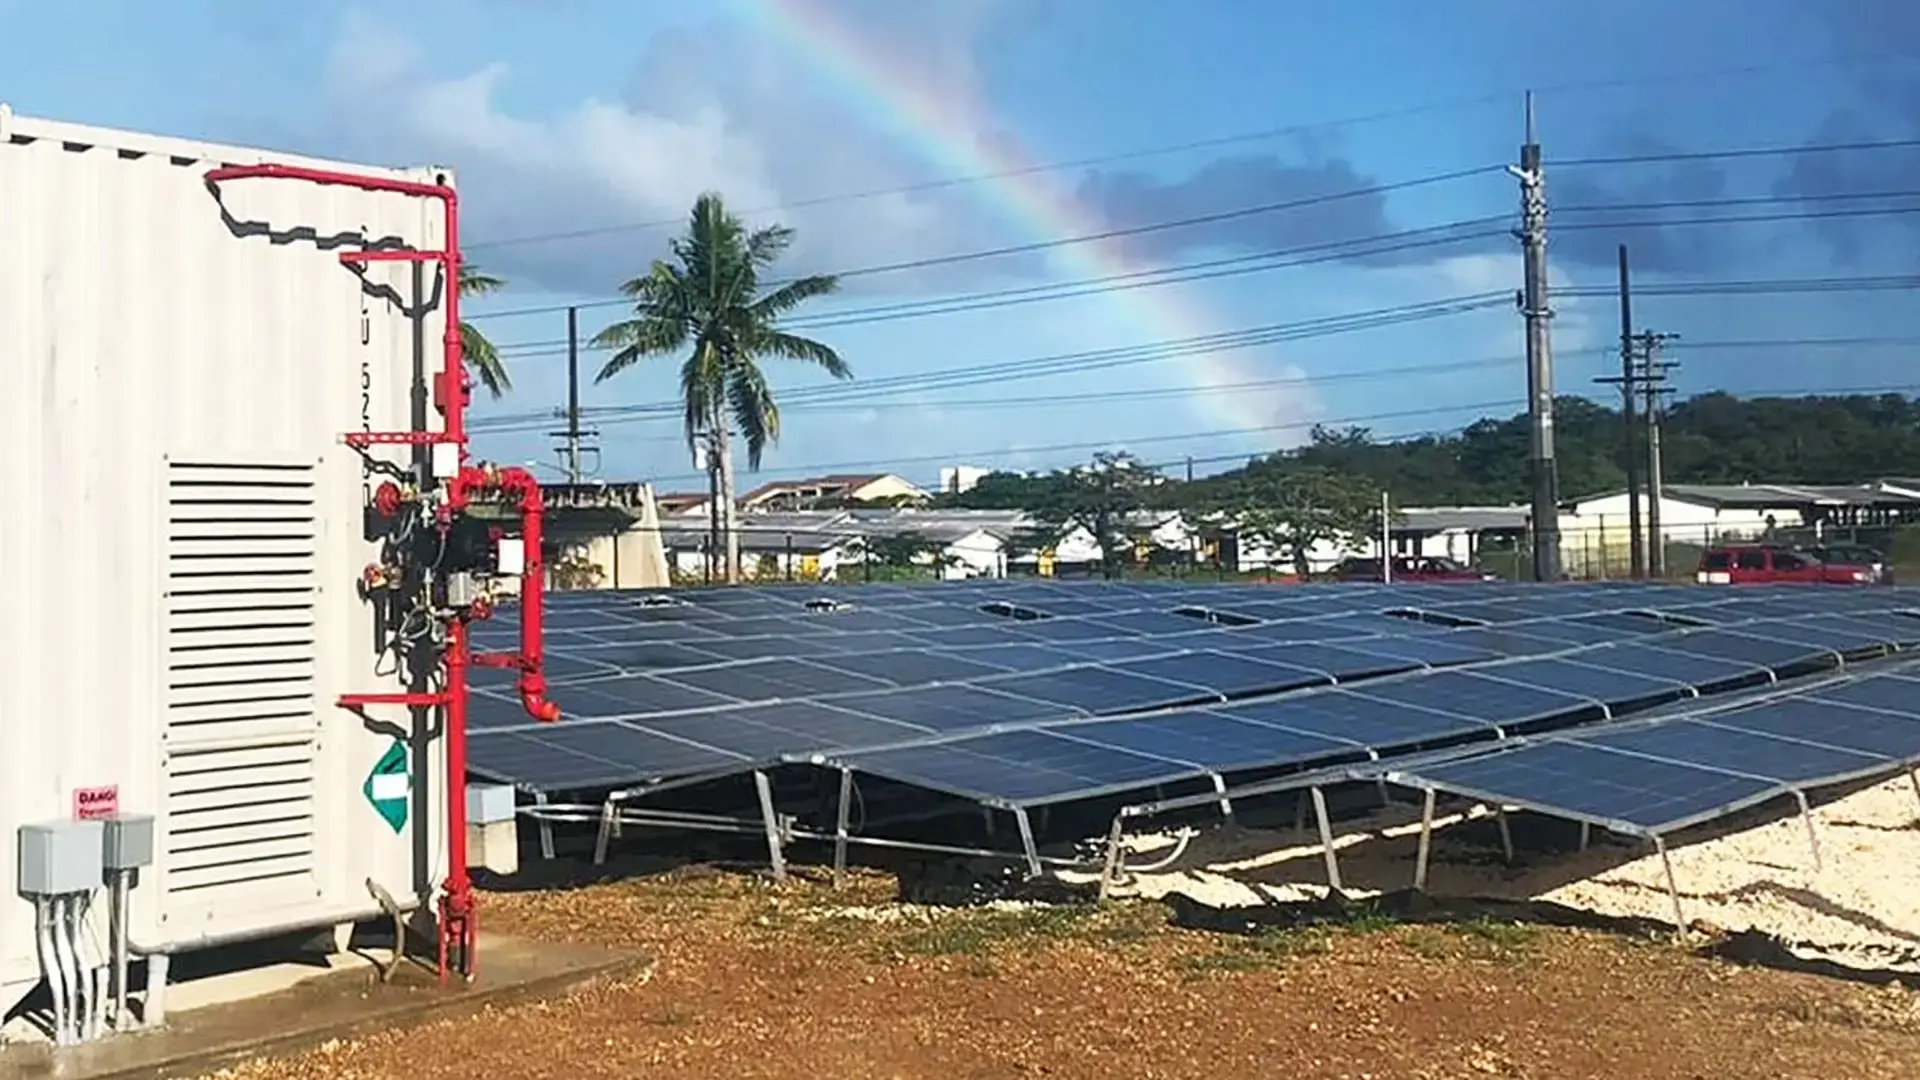 Solar panels with a rainbow in the background in South-East Asia